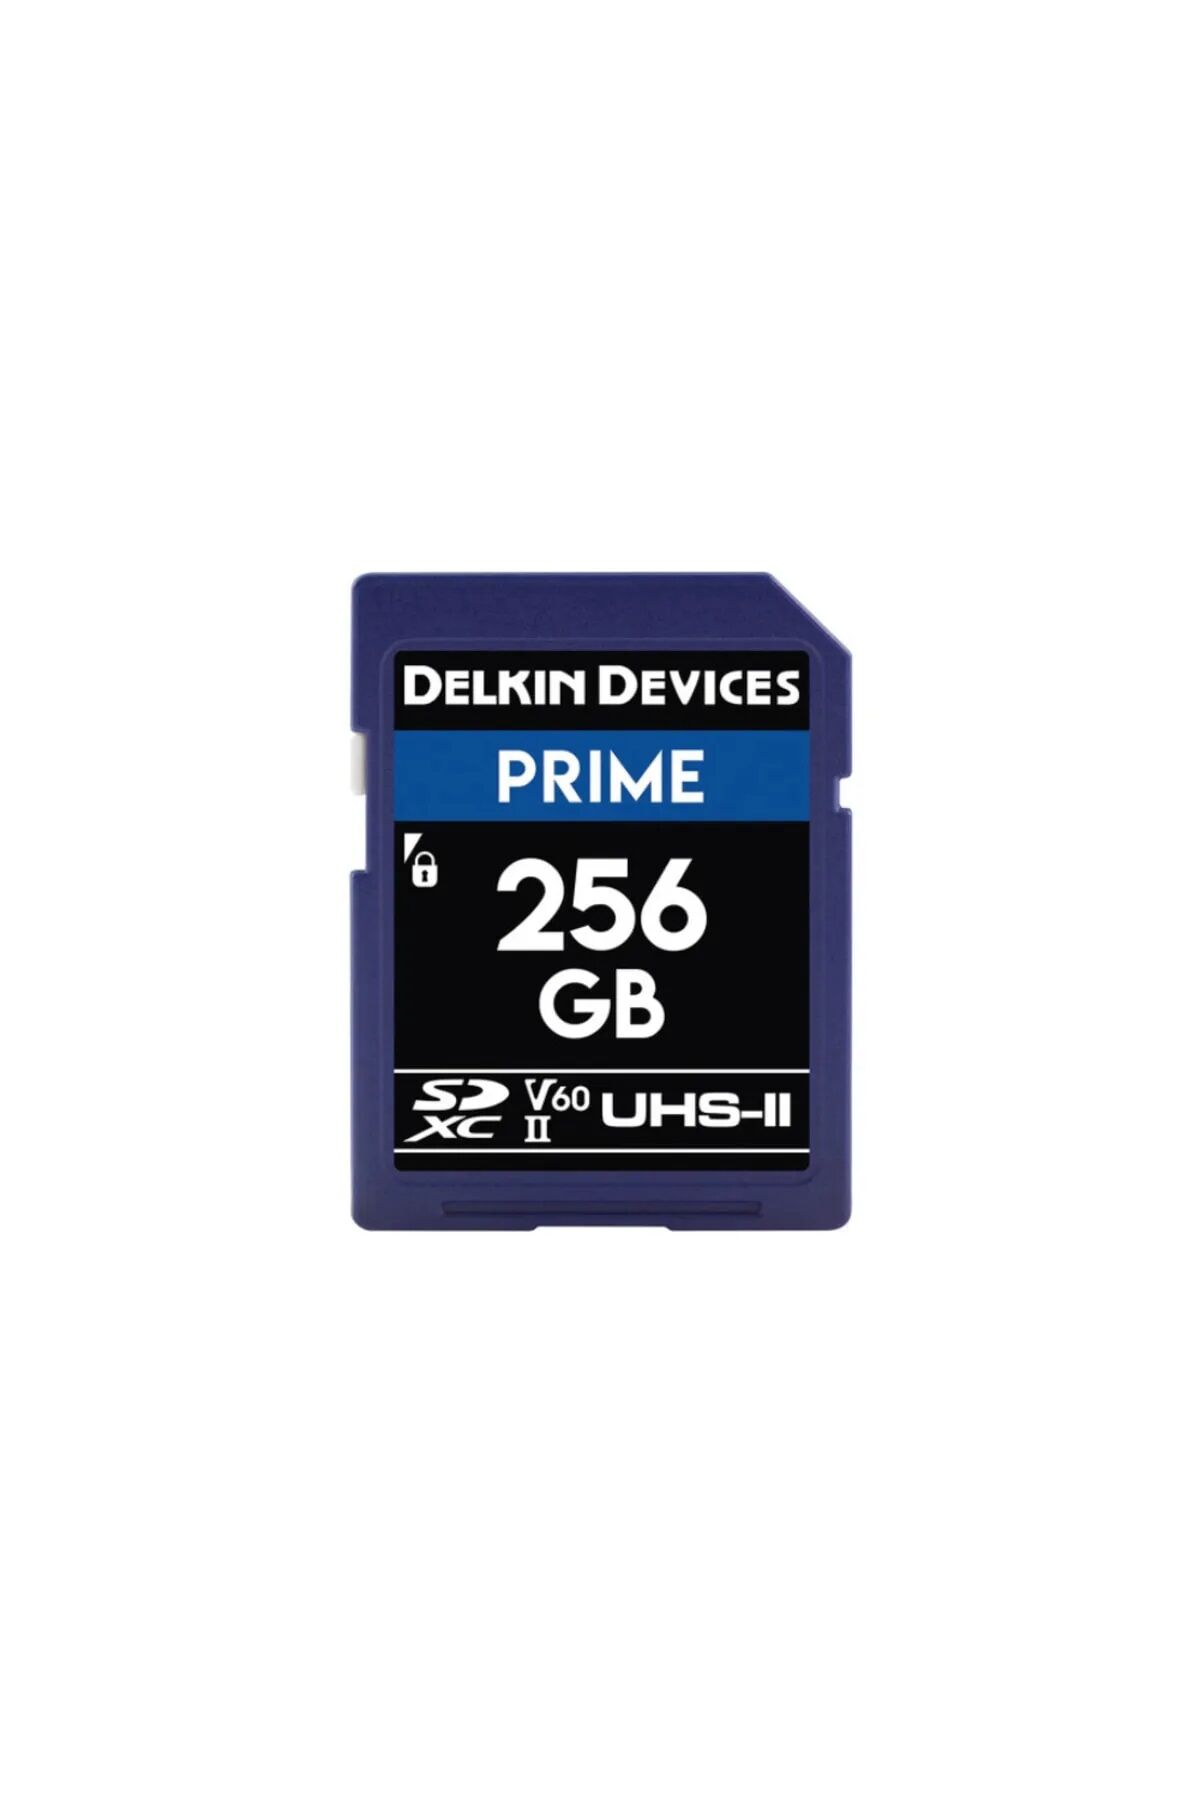 DELKIN DEVICES PRIME 256GB SDXC UHS-II V60 READ 280MB/s  WRITE 150MB/s